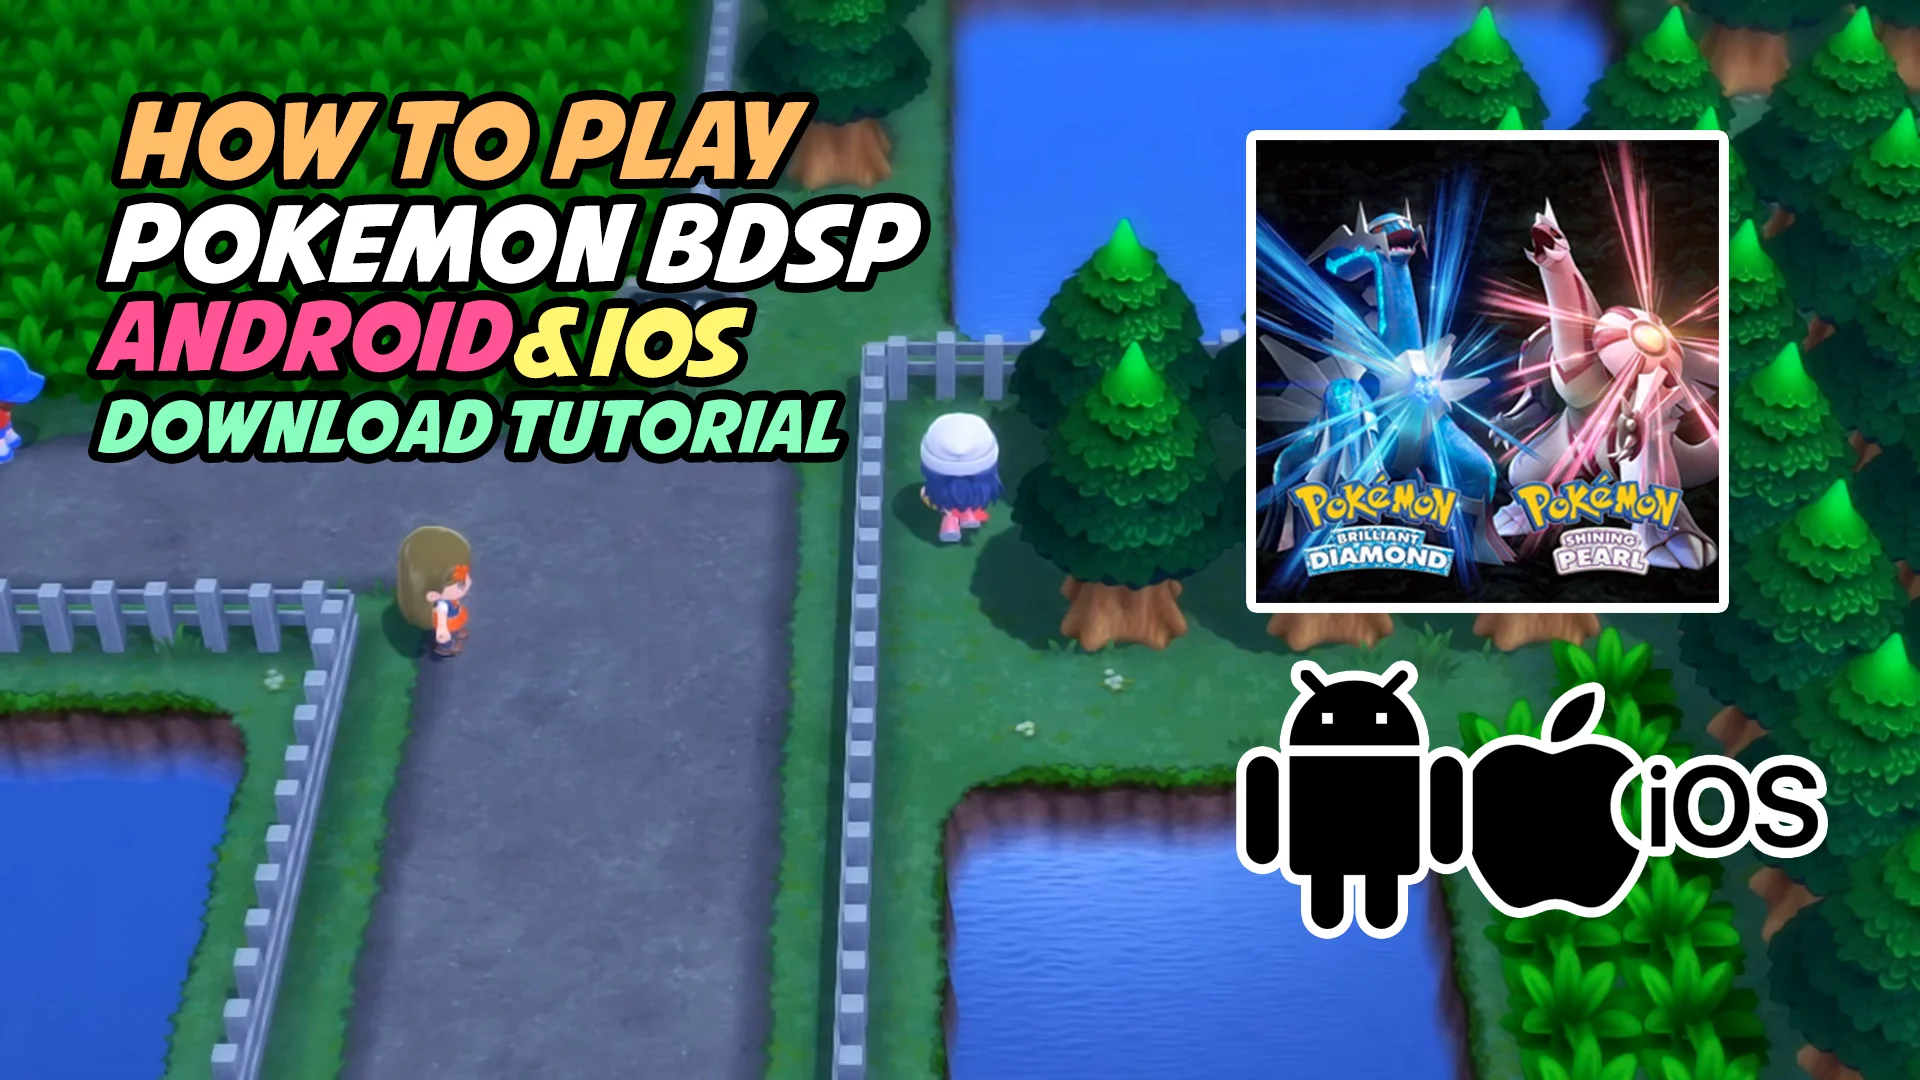 How To Download Pokémon Brilliant Diamond Gba Android /iOS Without Download